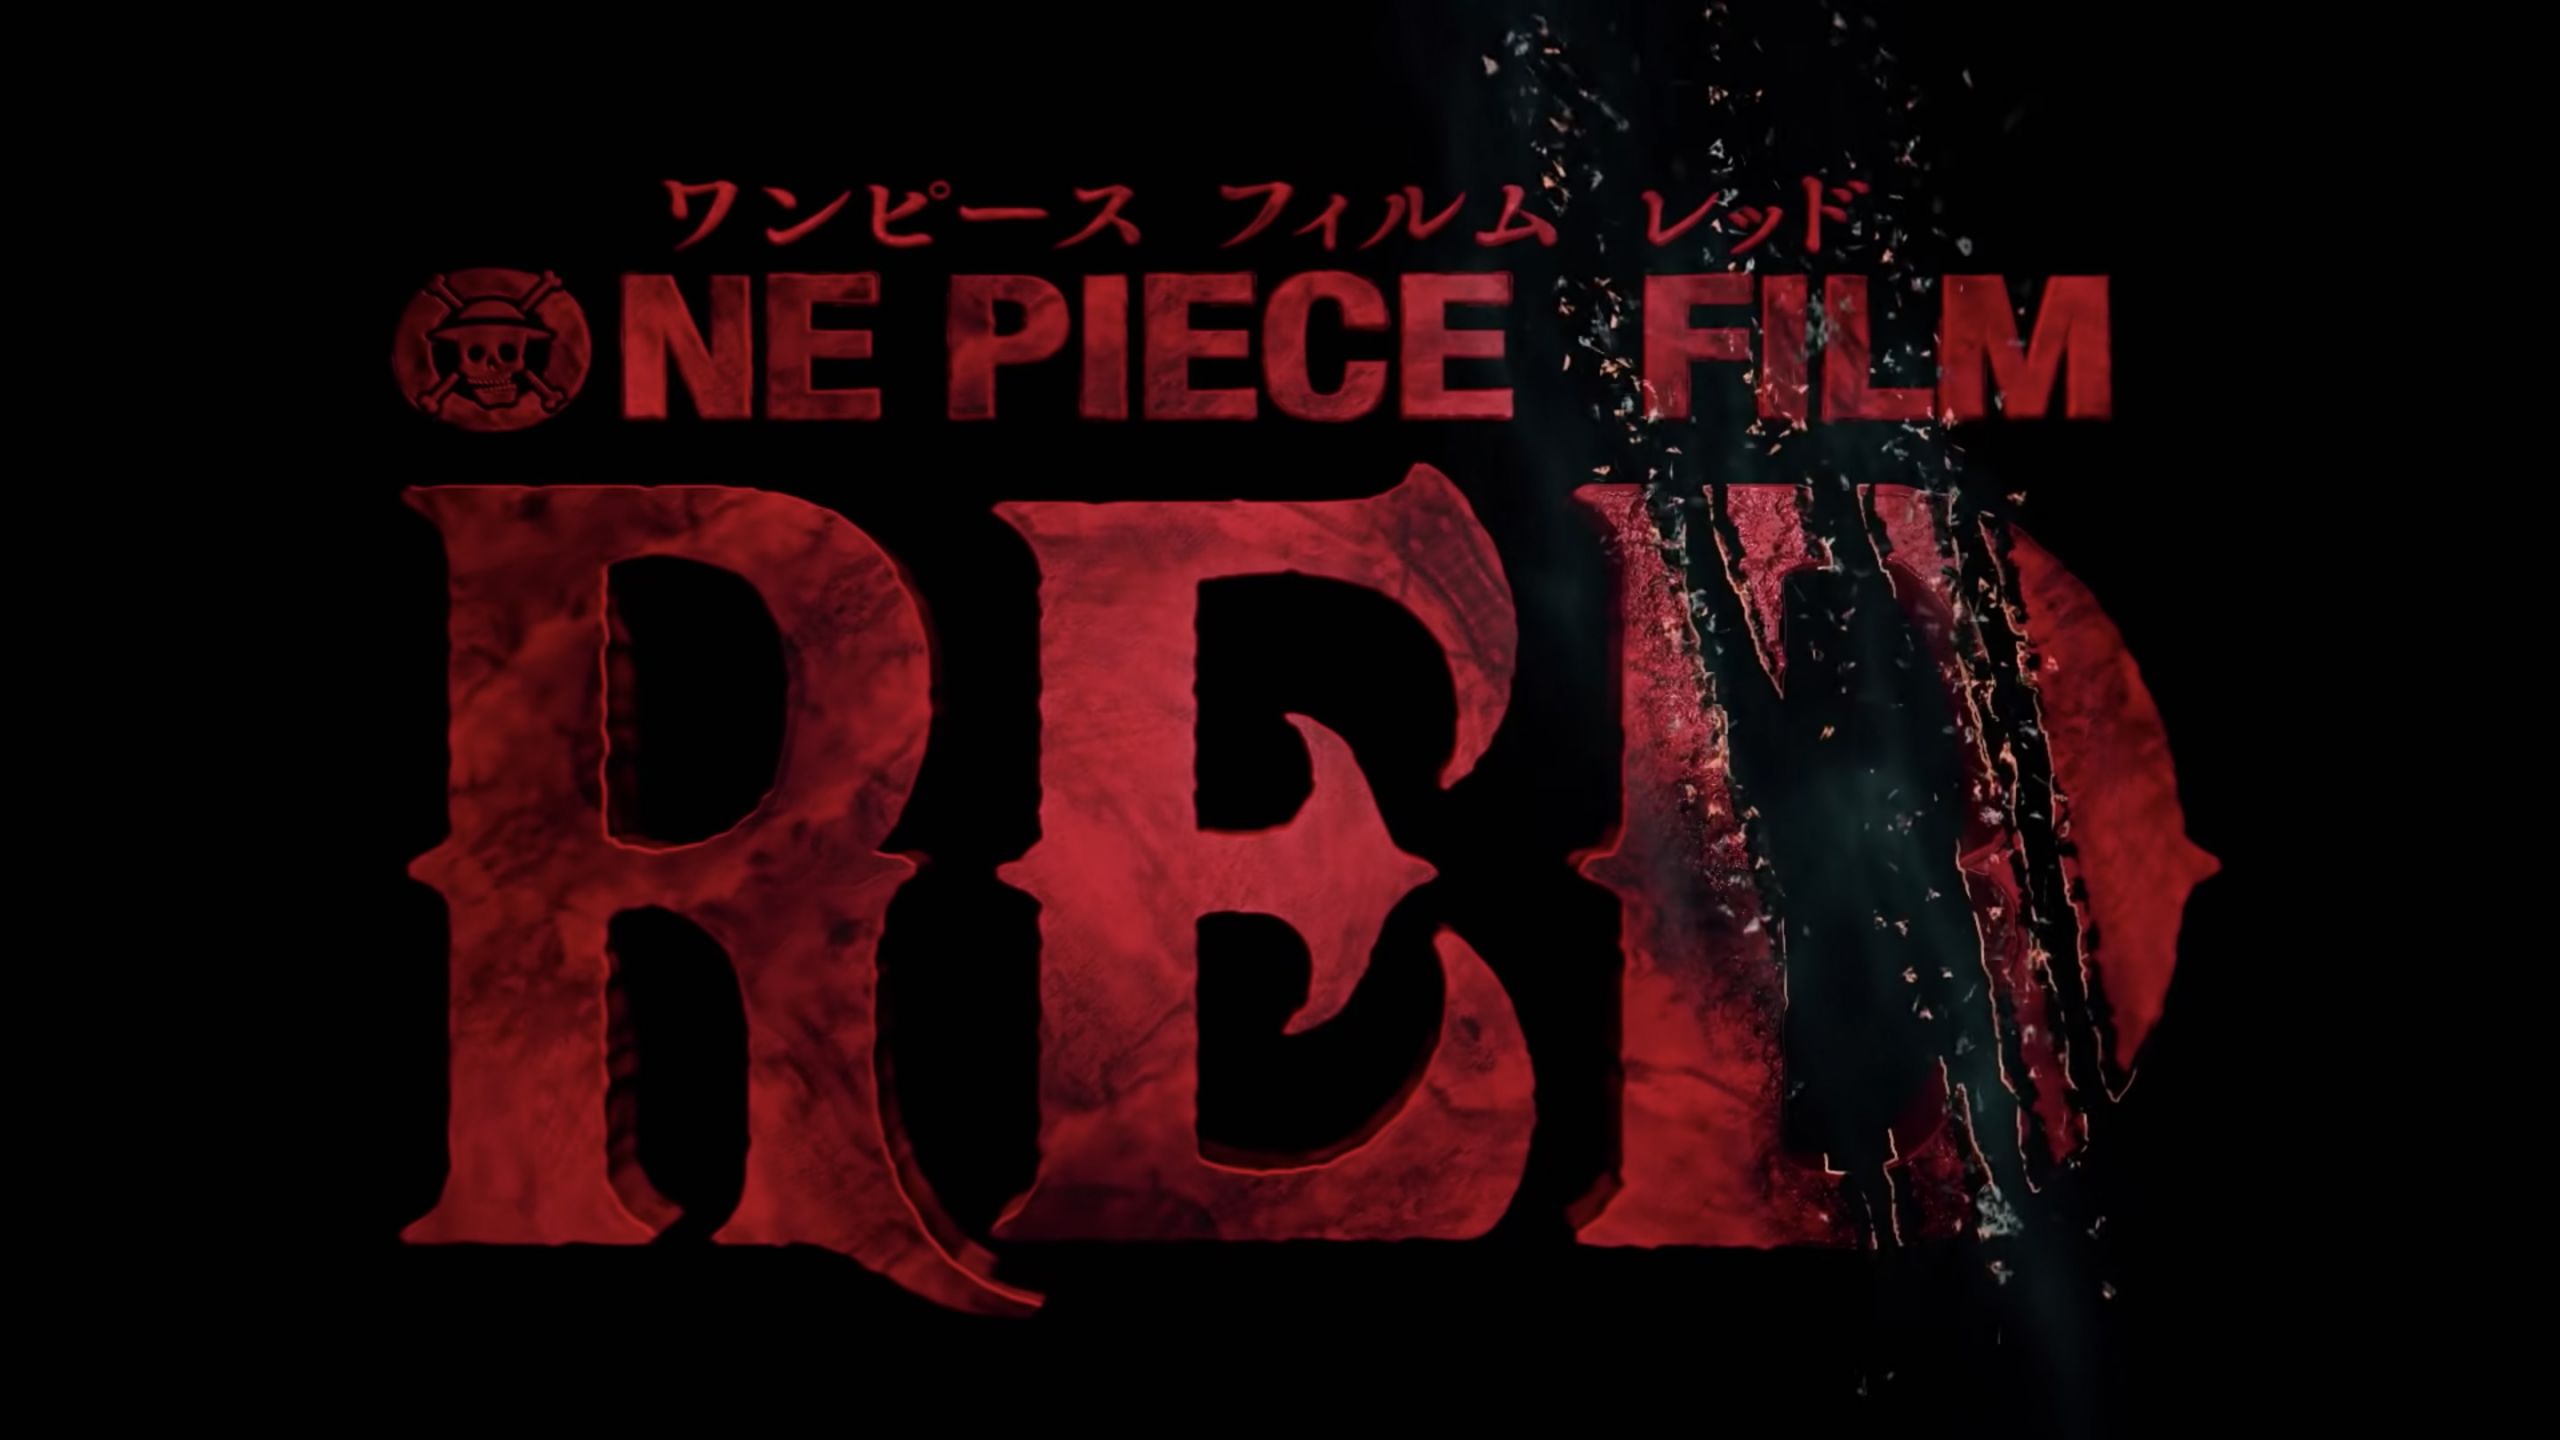 Crunchyroll To Host One Piece's English-Dubbed Version on July 5